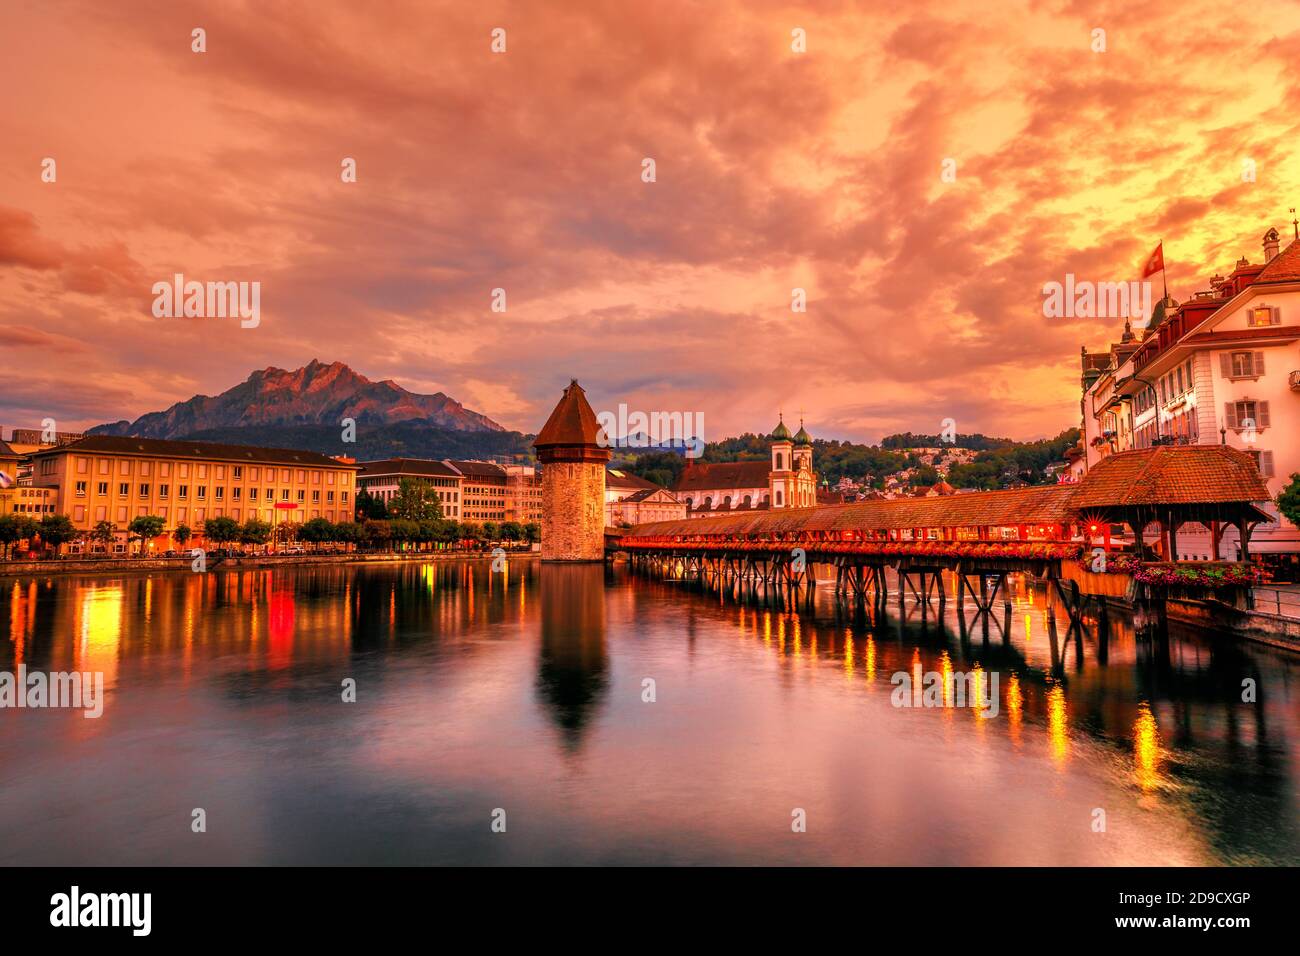 Mount Pilatus mountain overlooking the skyline of Lucerne town of Switzerland. Dusk cityscape with city lights and Chapel Bridge with Water Tower on Stock Photo